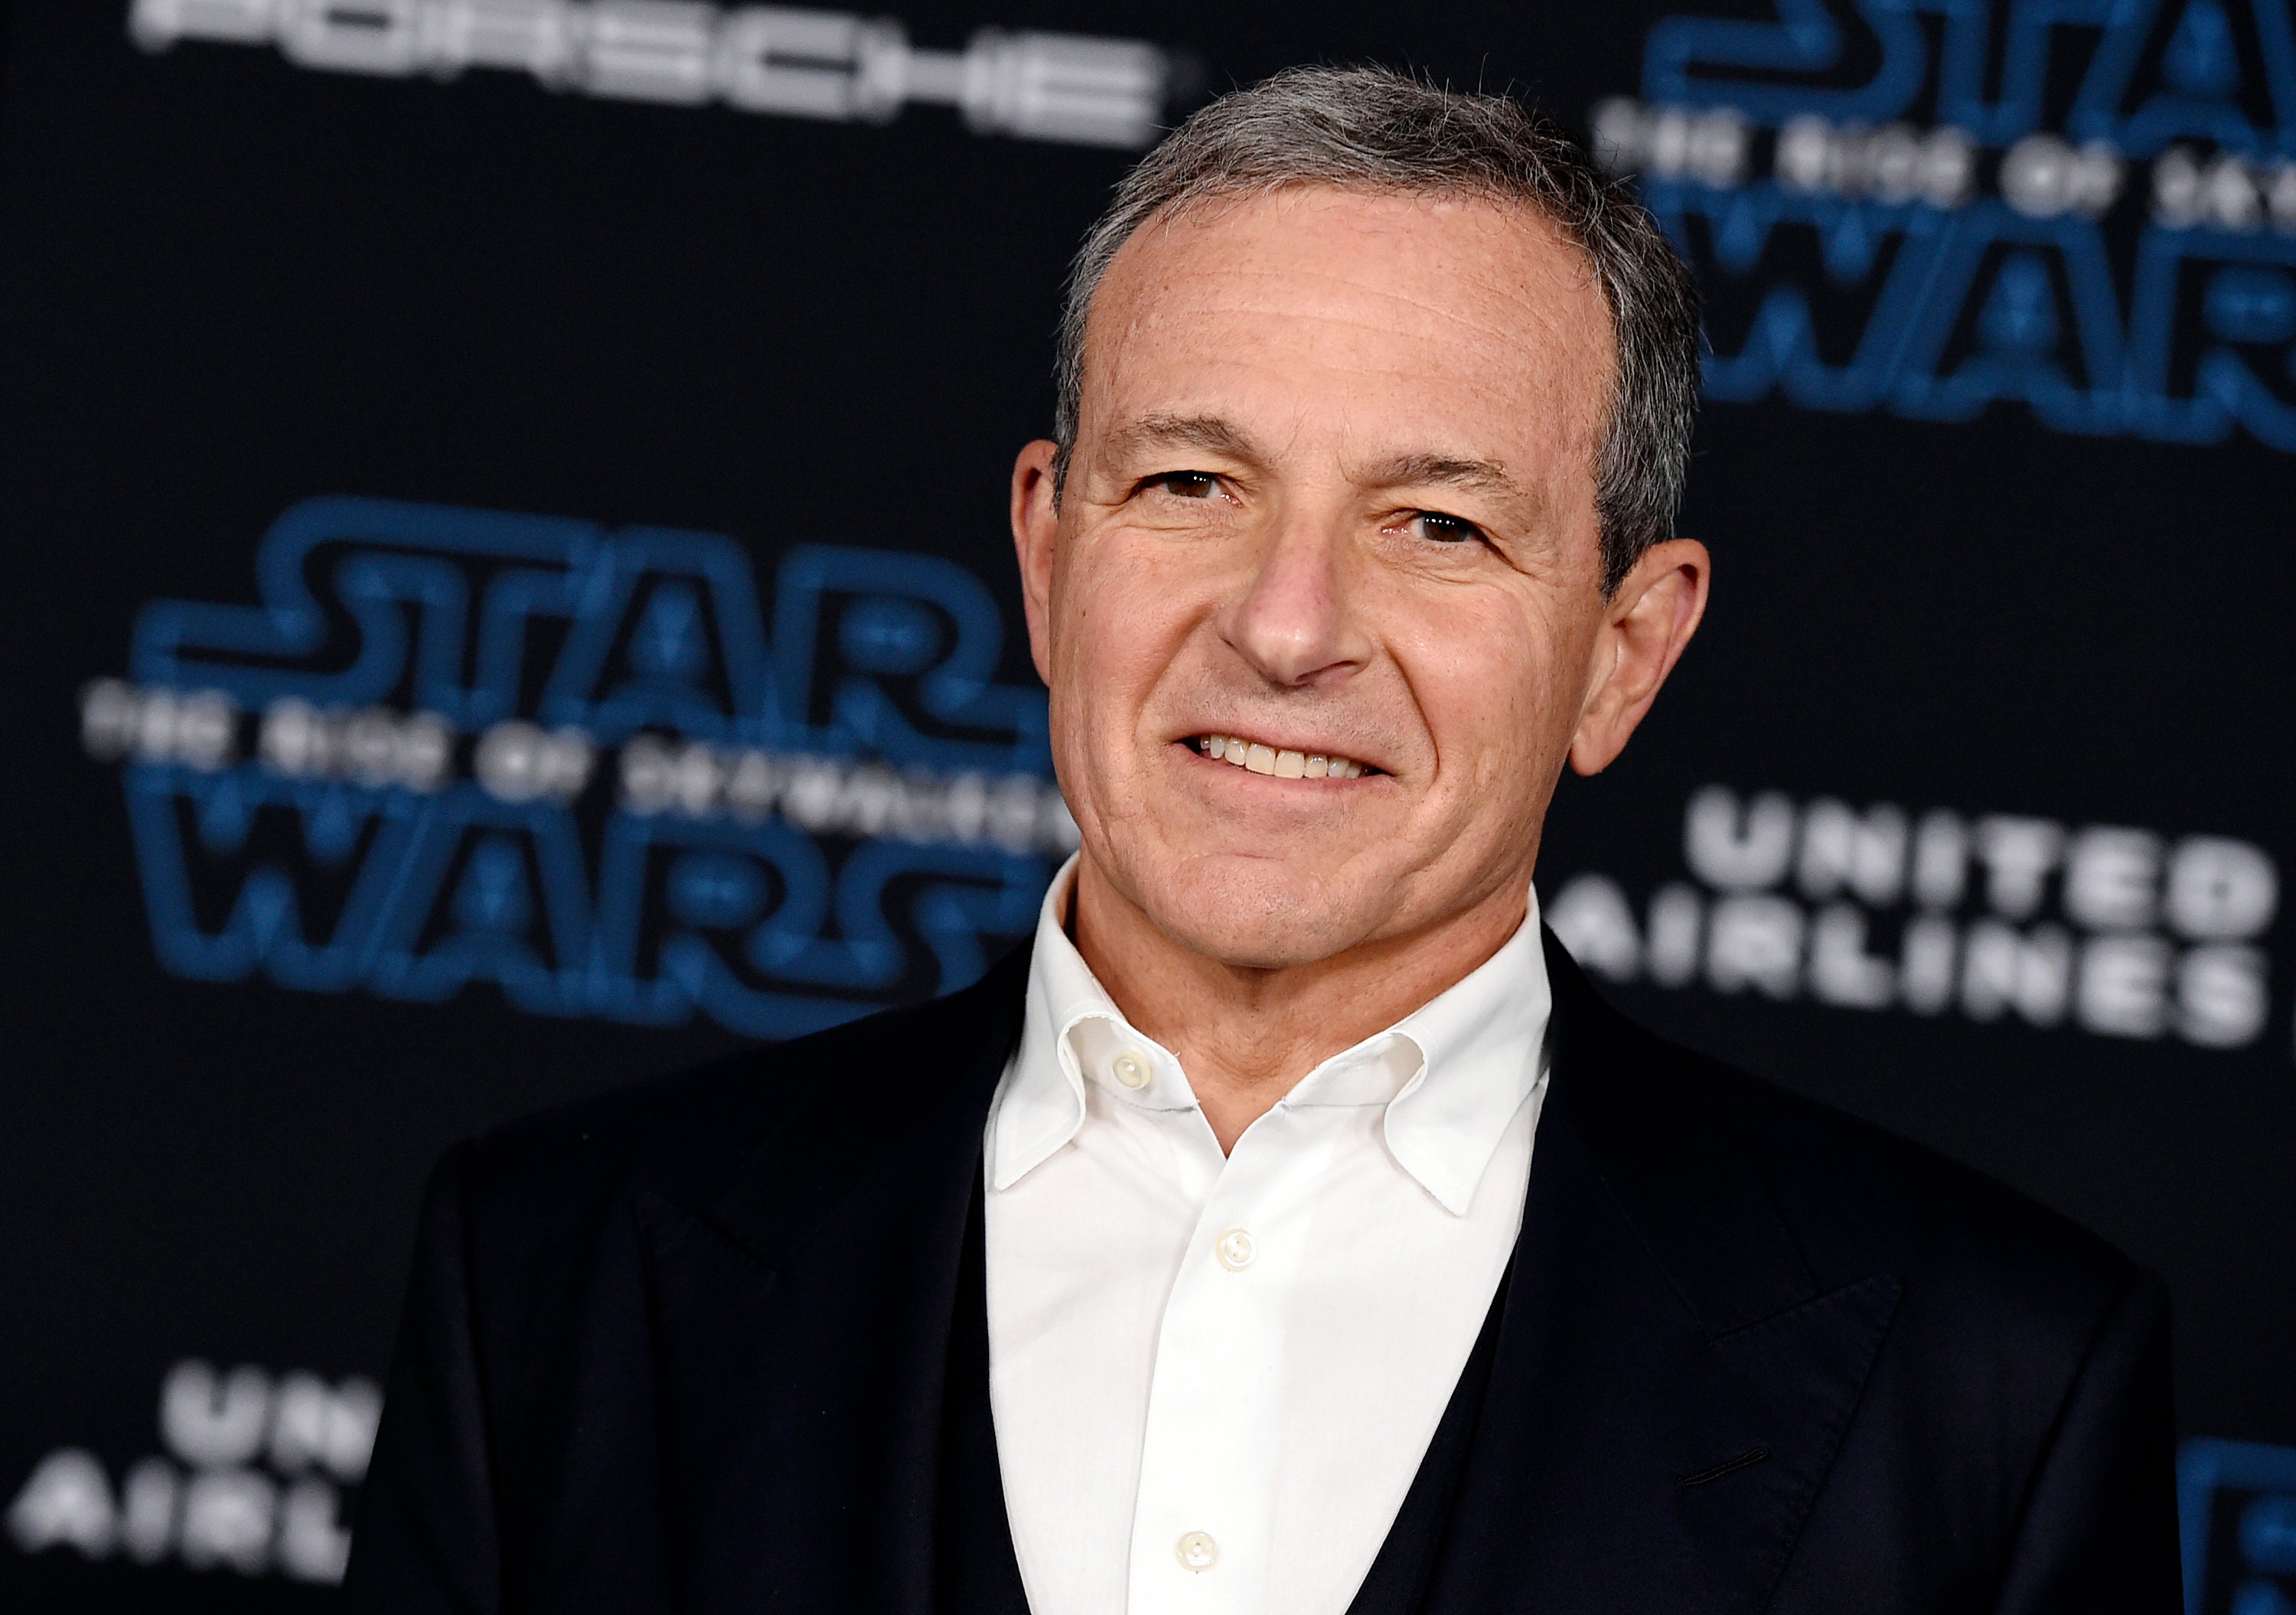 The prodigal son returns: Bob Iger is back as boss of Disney